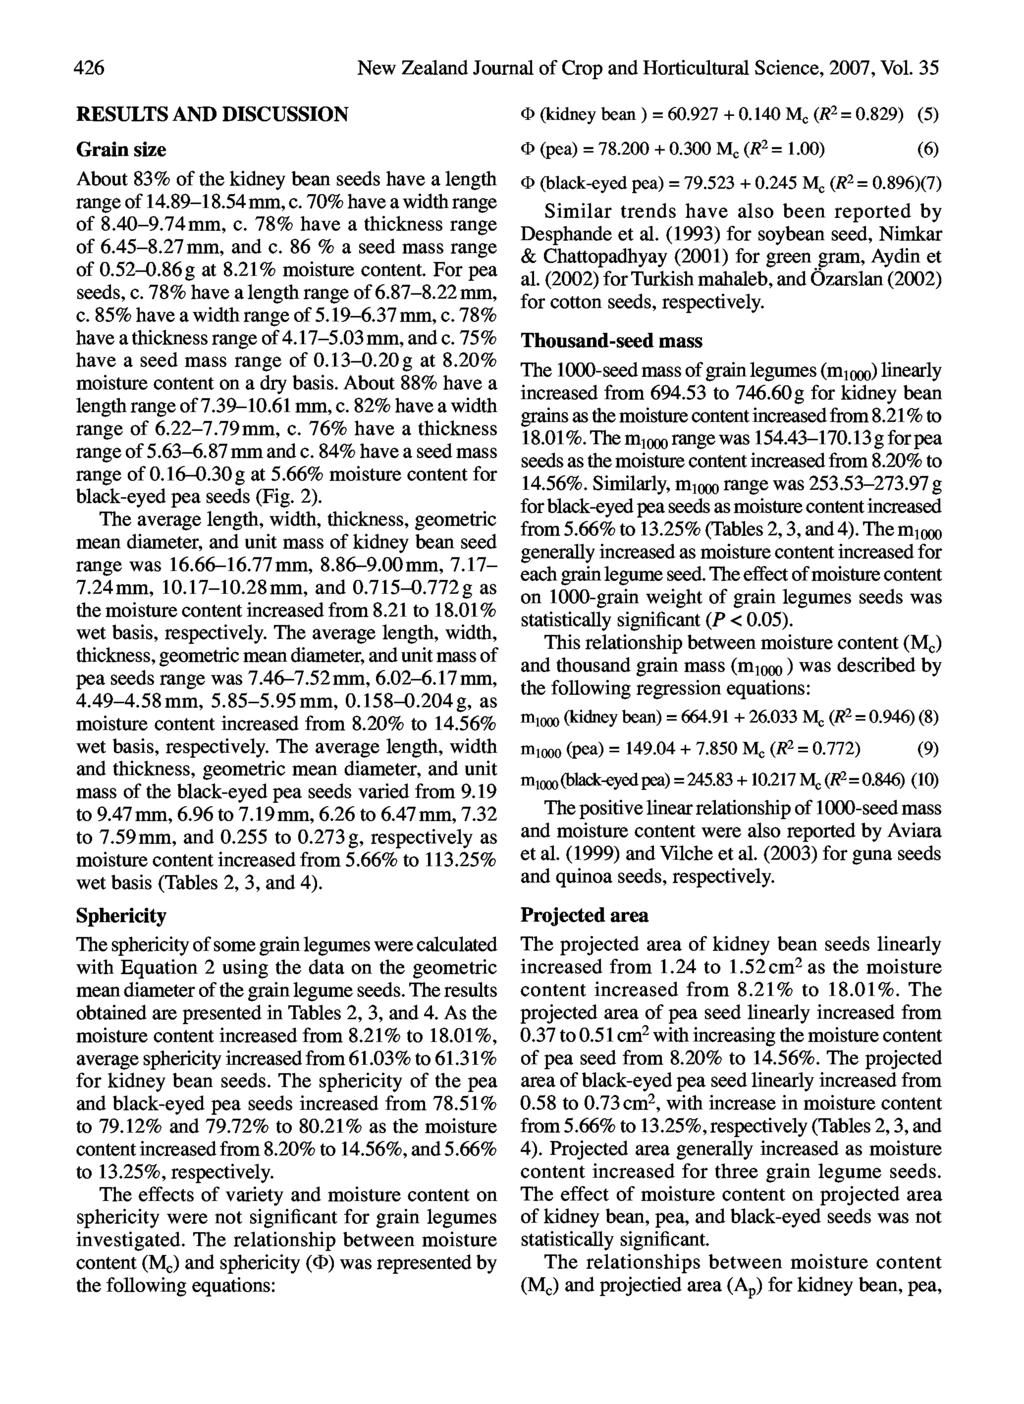 426 new Zealand Journal of Crop and Horticultural science, 2007, Vol. 35 RESULTS AND DISCUSSION Grain size About 83% of the kidney bean seeds have a length range of 14.89-18.54 mm, c.